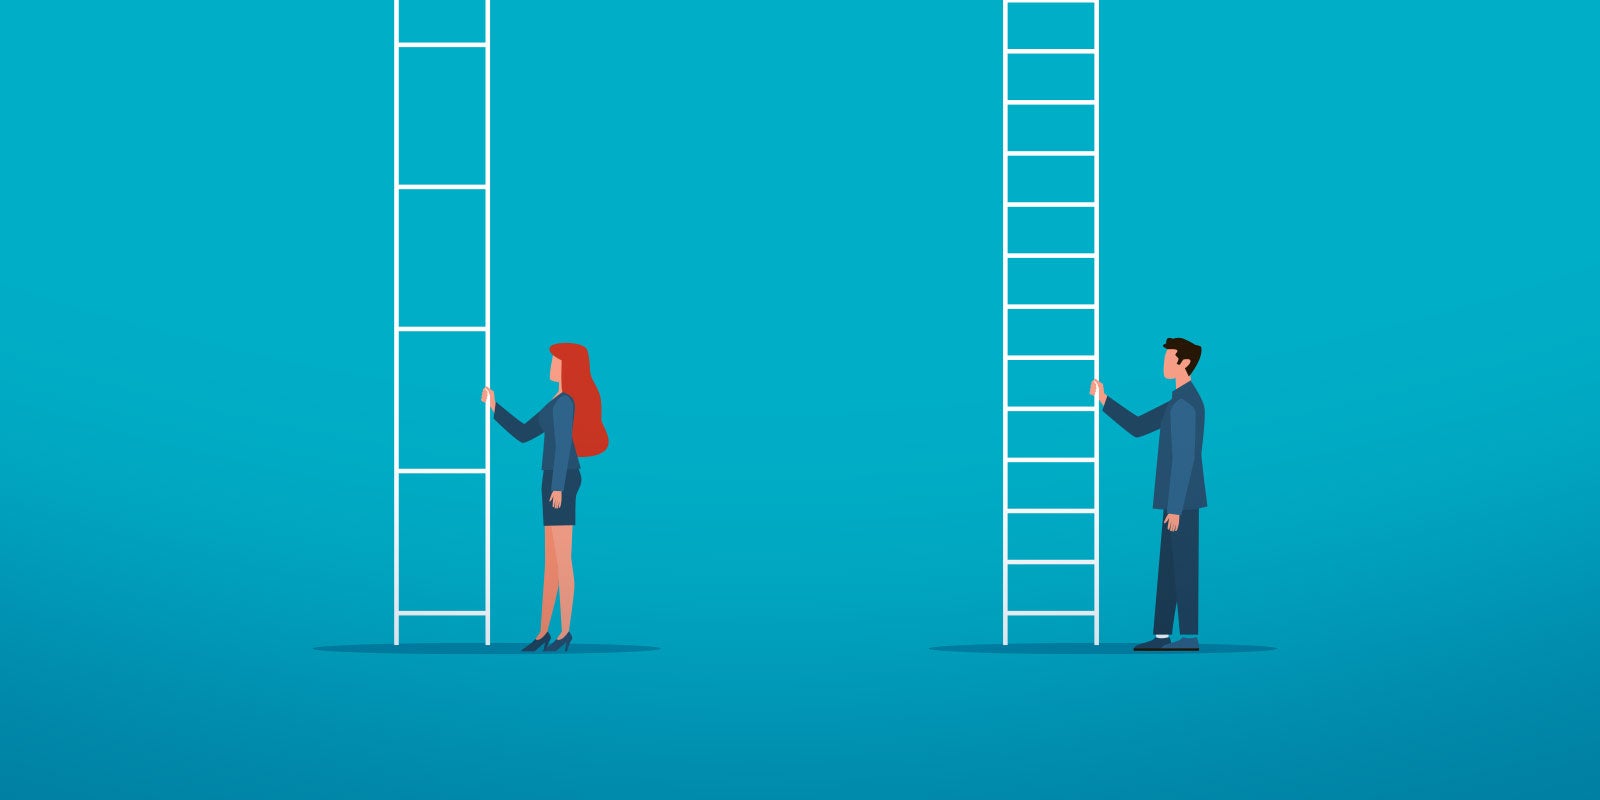 two animated ladders with a woman standing next to one where the rungs are further apart and a man standing next to the other ladder with the rungs much closer together to symbolize  women struggling to get P&L responsibility